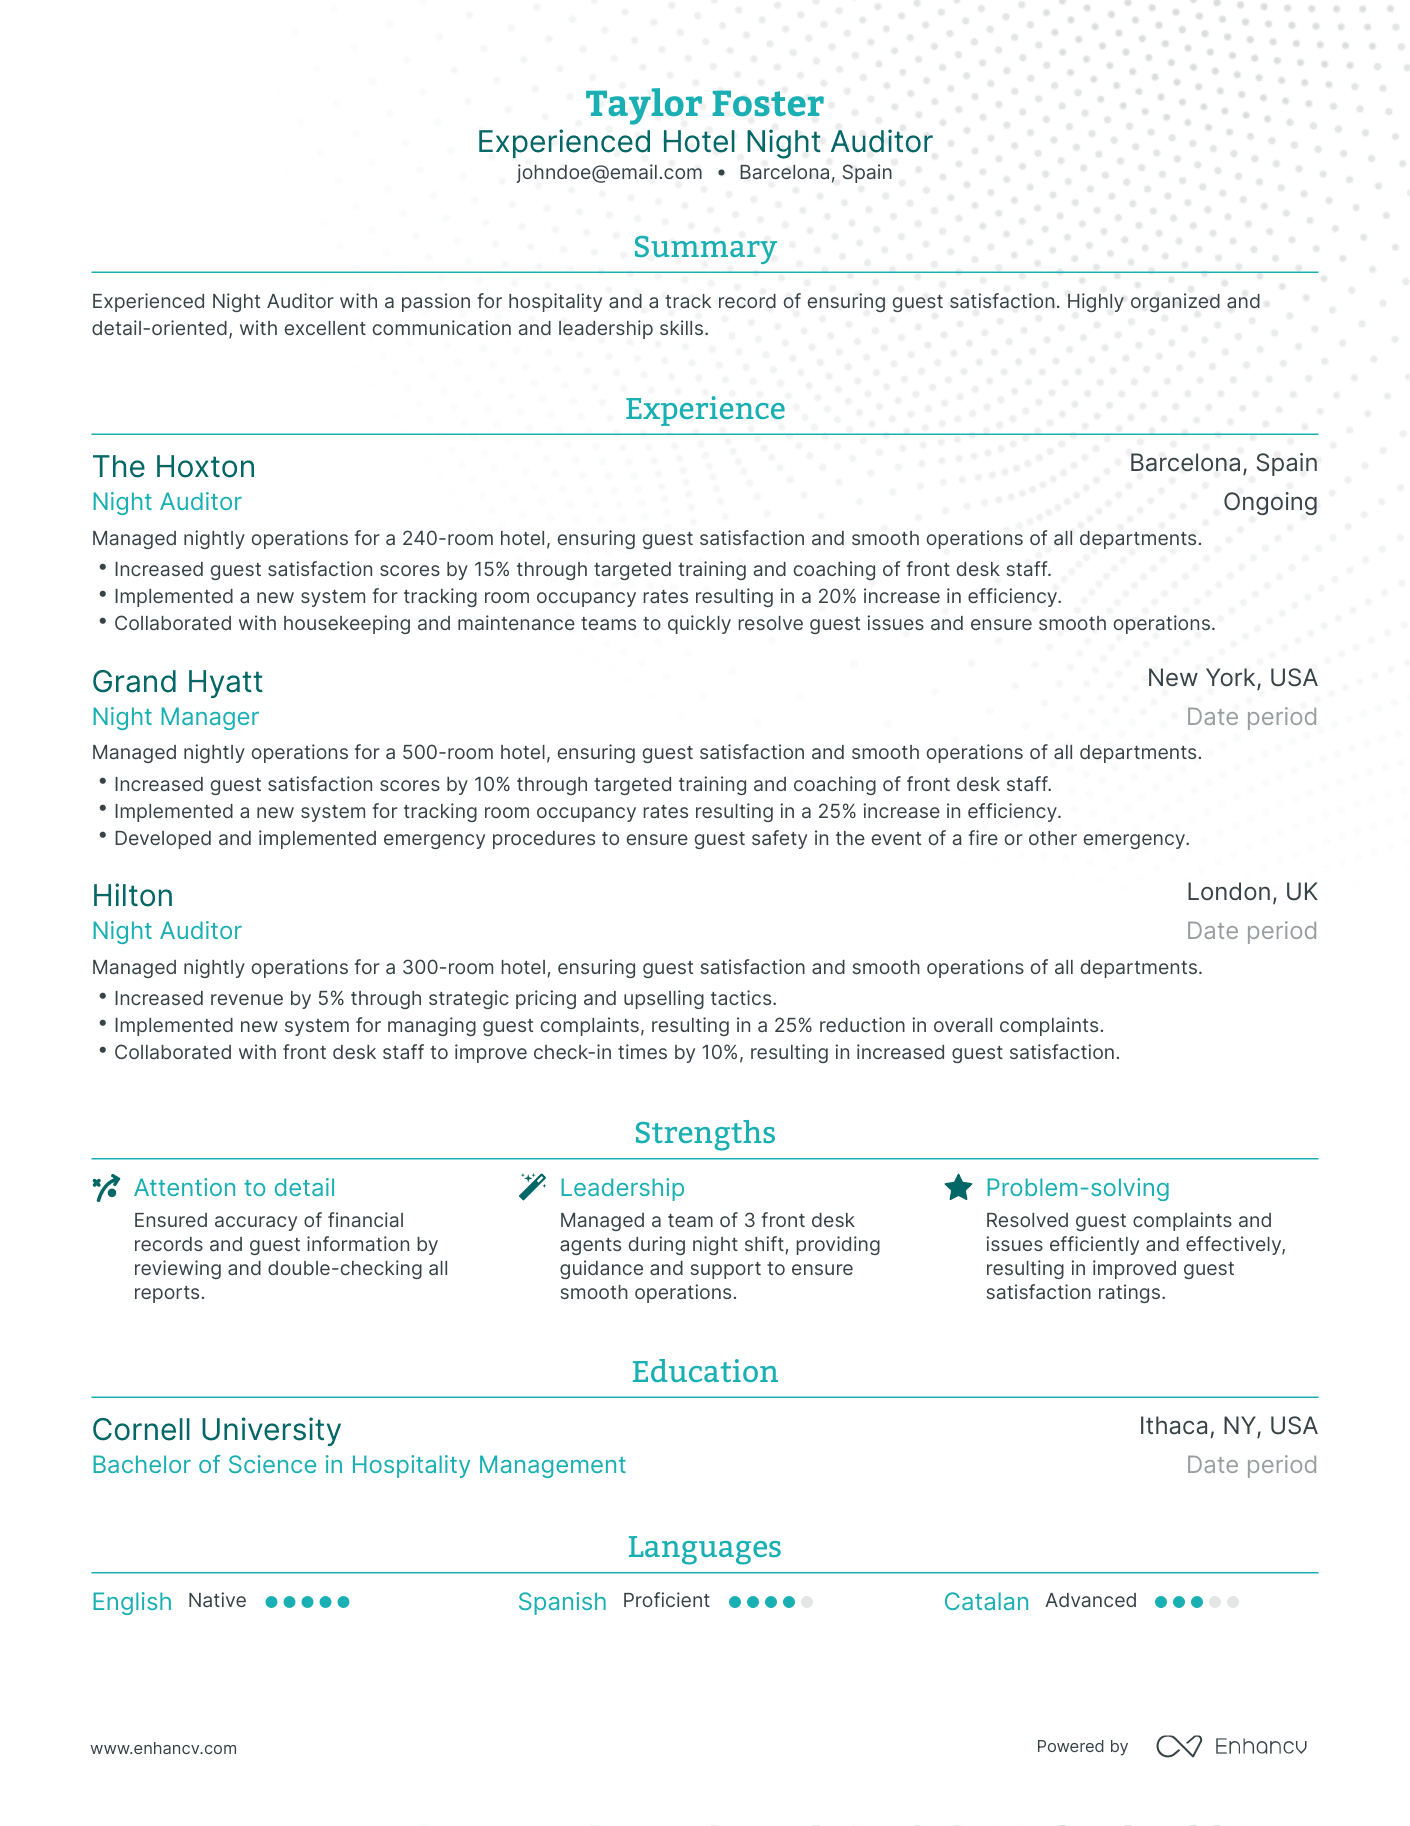 Traditional Hotel Night Auditor Resume Template